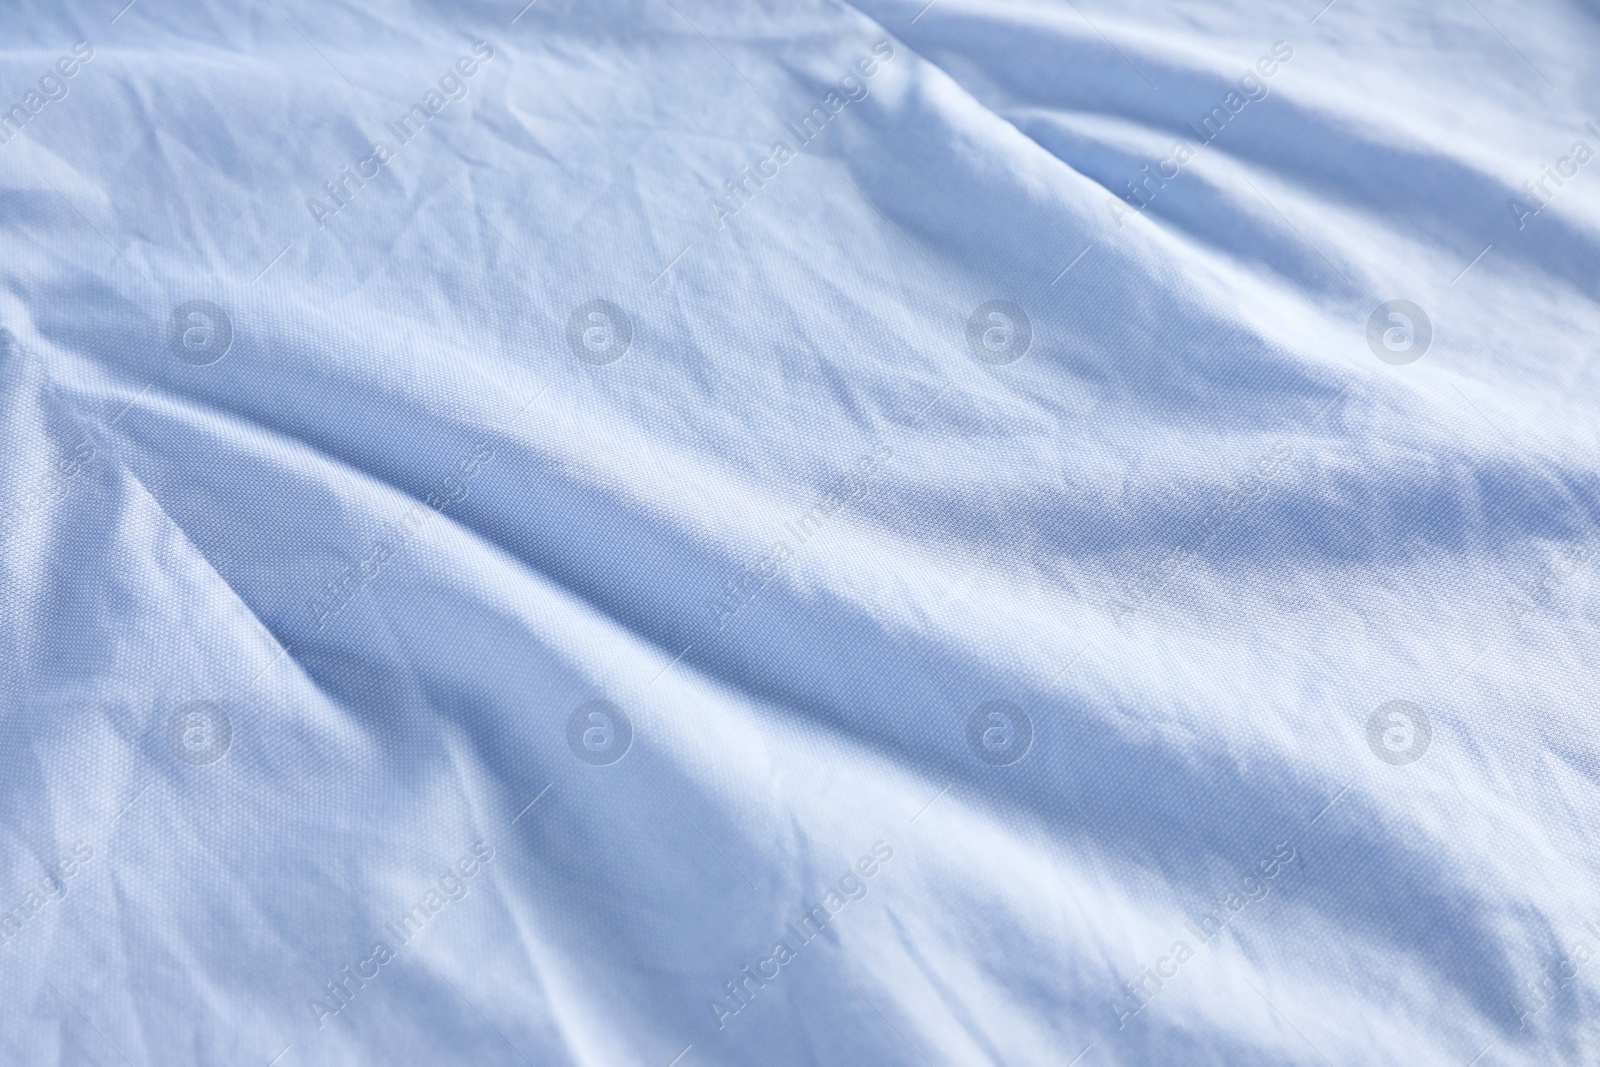 Photo of Crumpled light blue fabric as background, closeup view